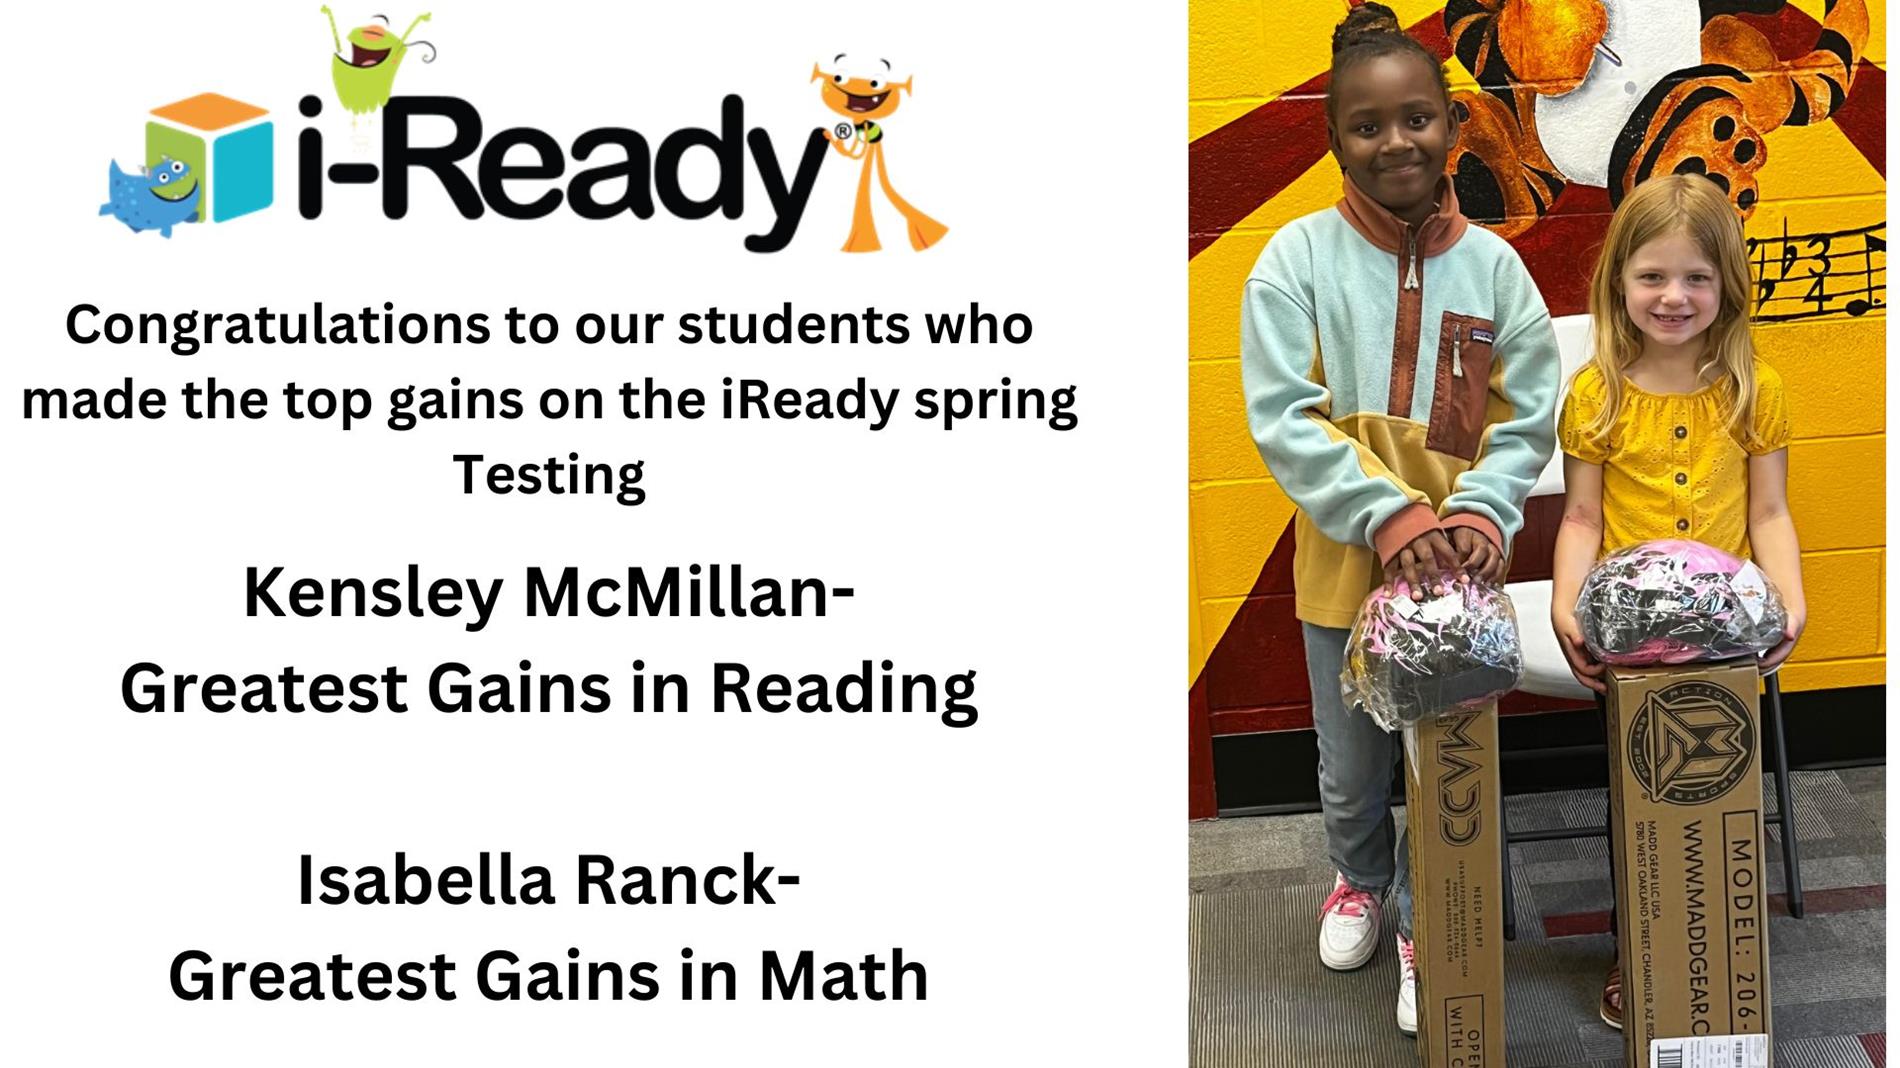 Greatest Gains for I-Ready Spring